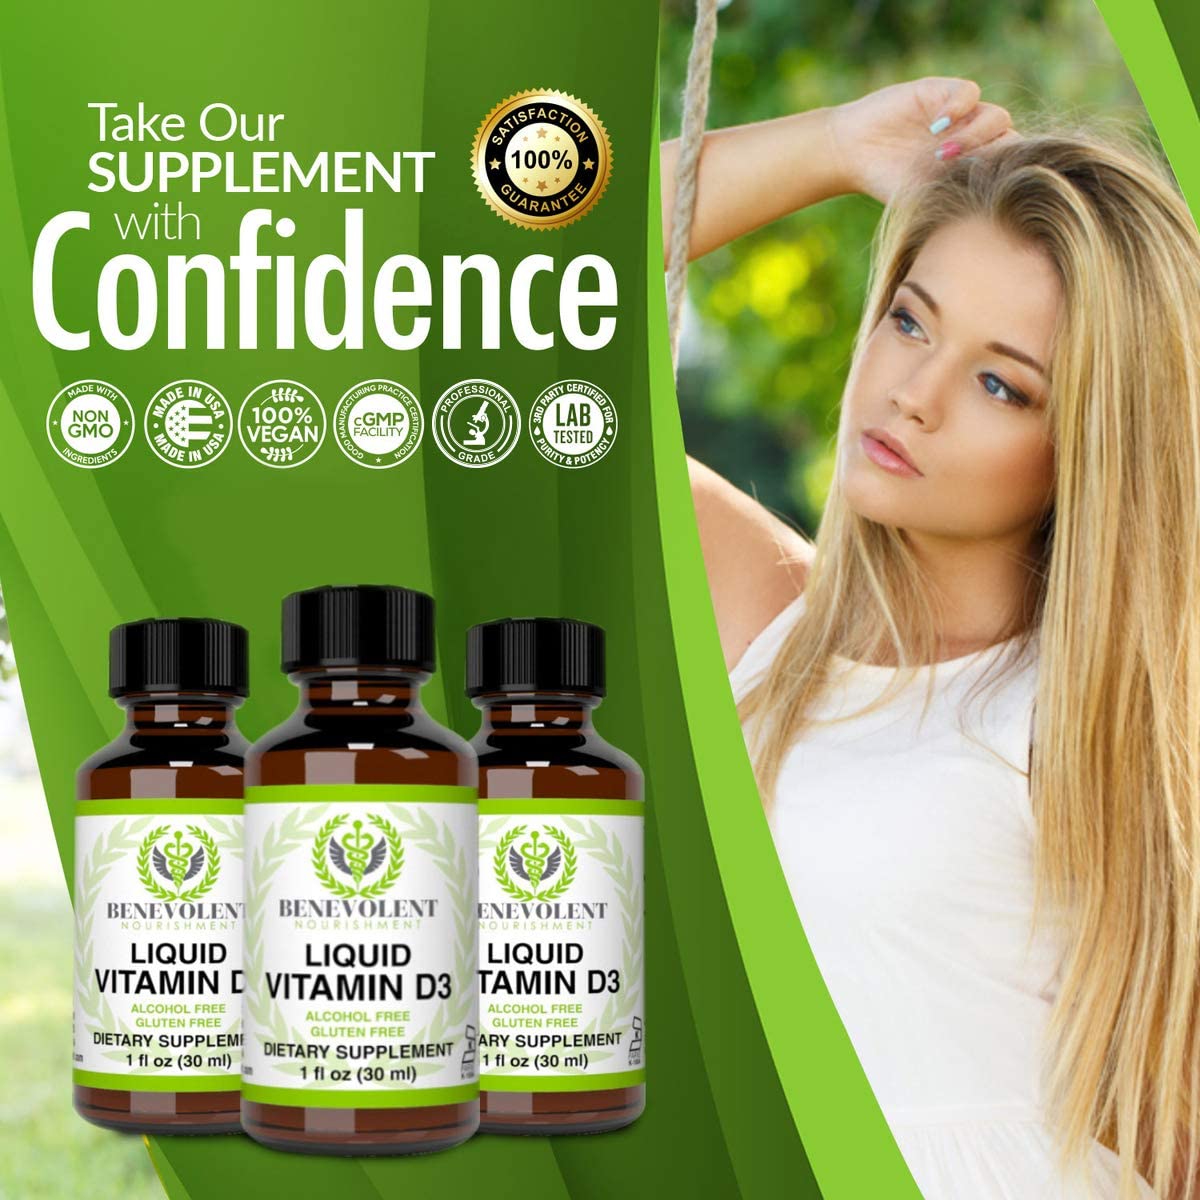 Take our supplements with confidence